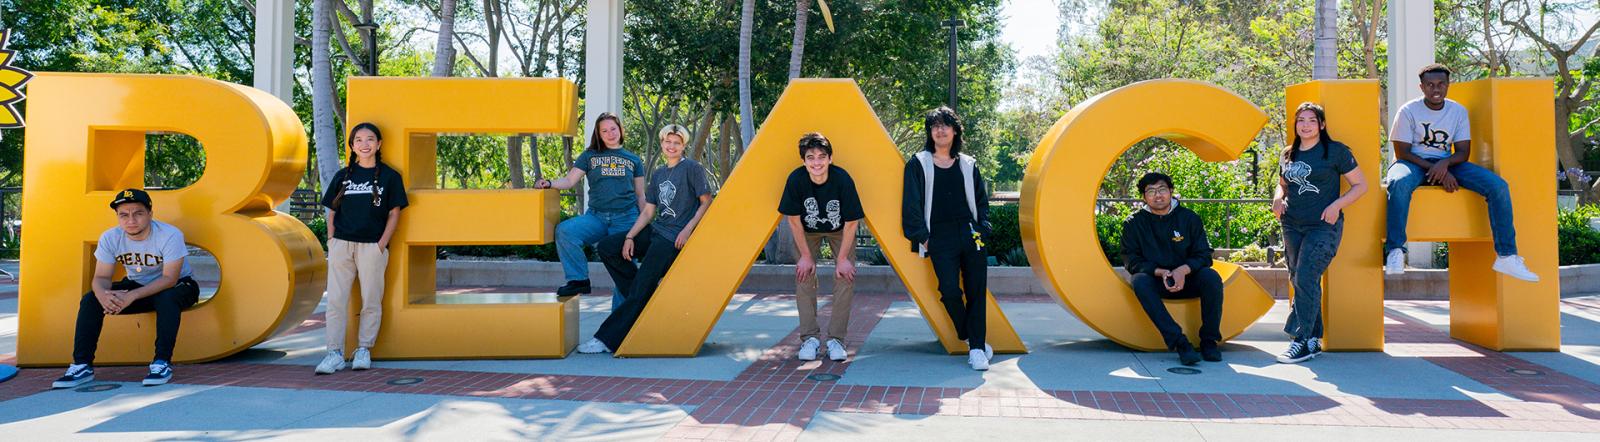 Students hanging out on the Beach sign at CSULB smiling for the camera. 